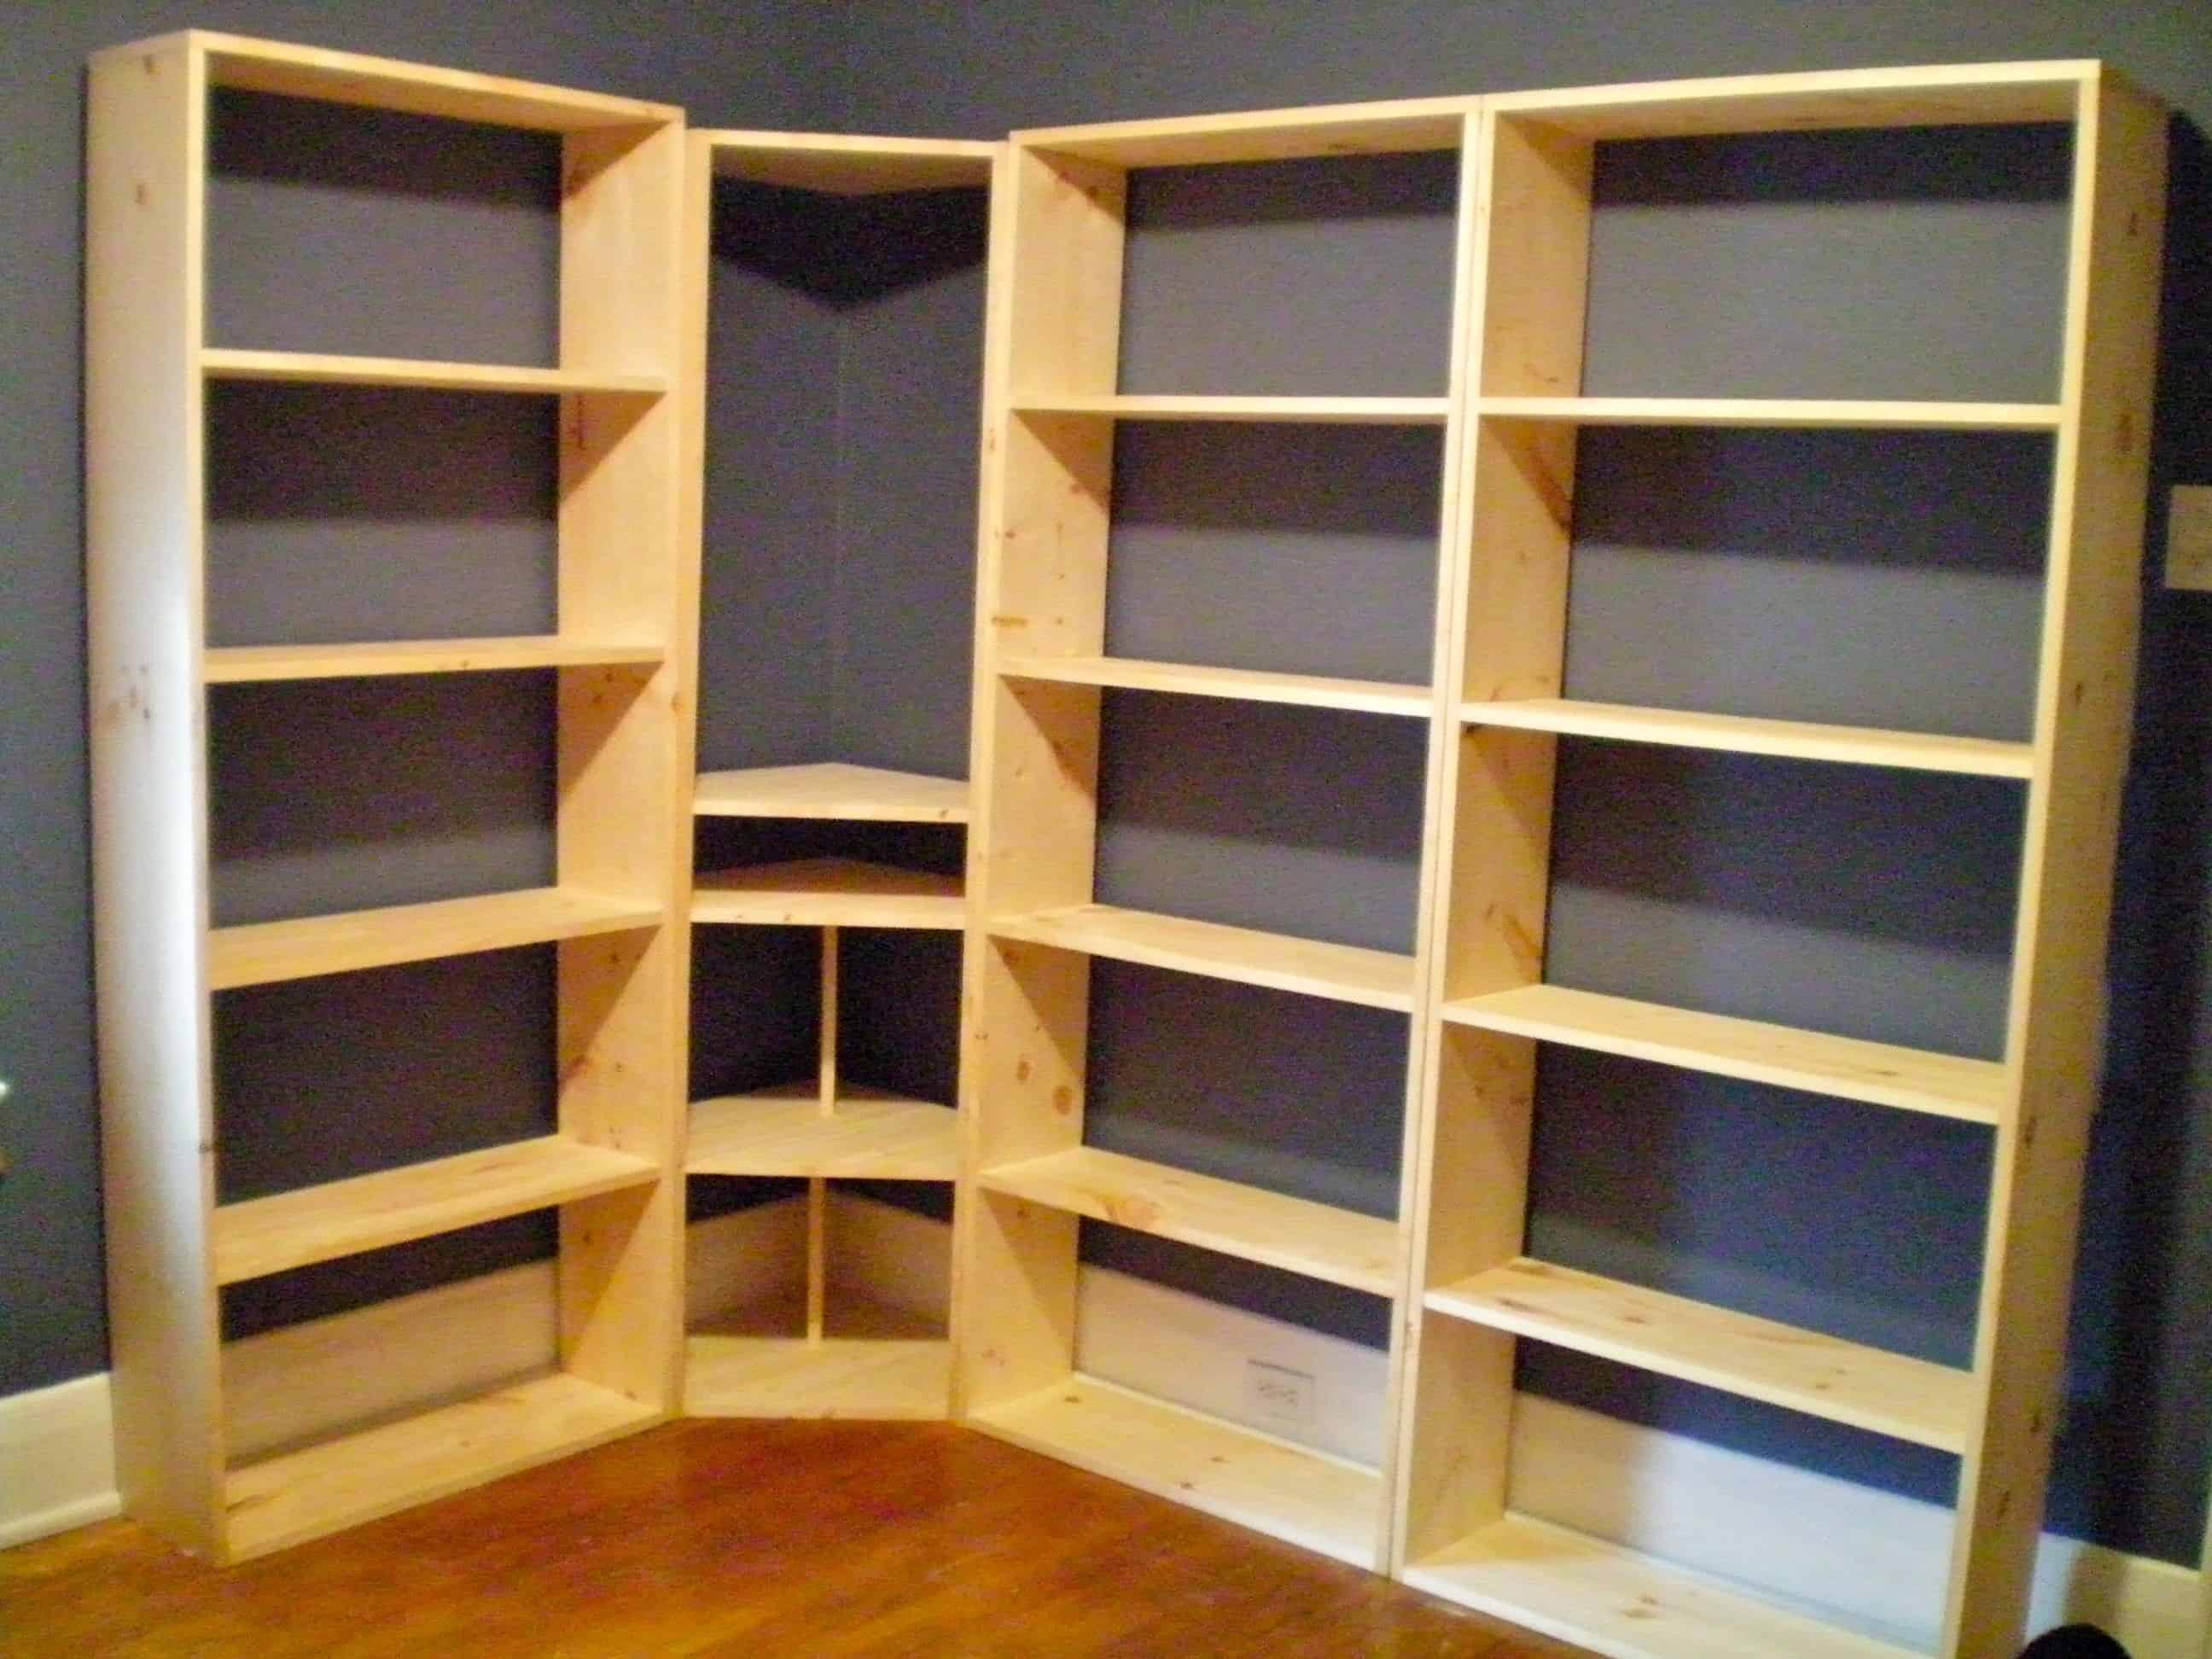 How To Build Bookshelves On A Wall The Housing Forum